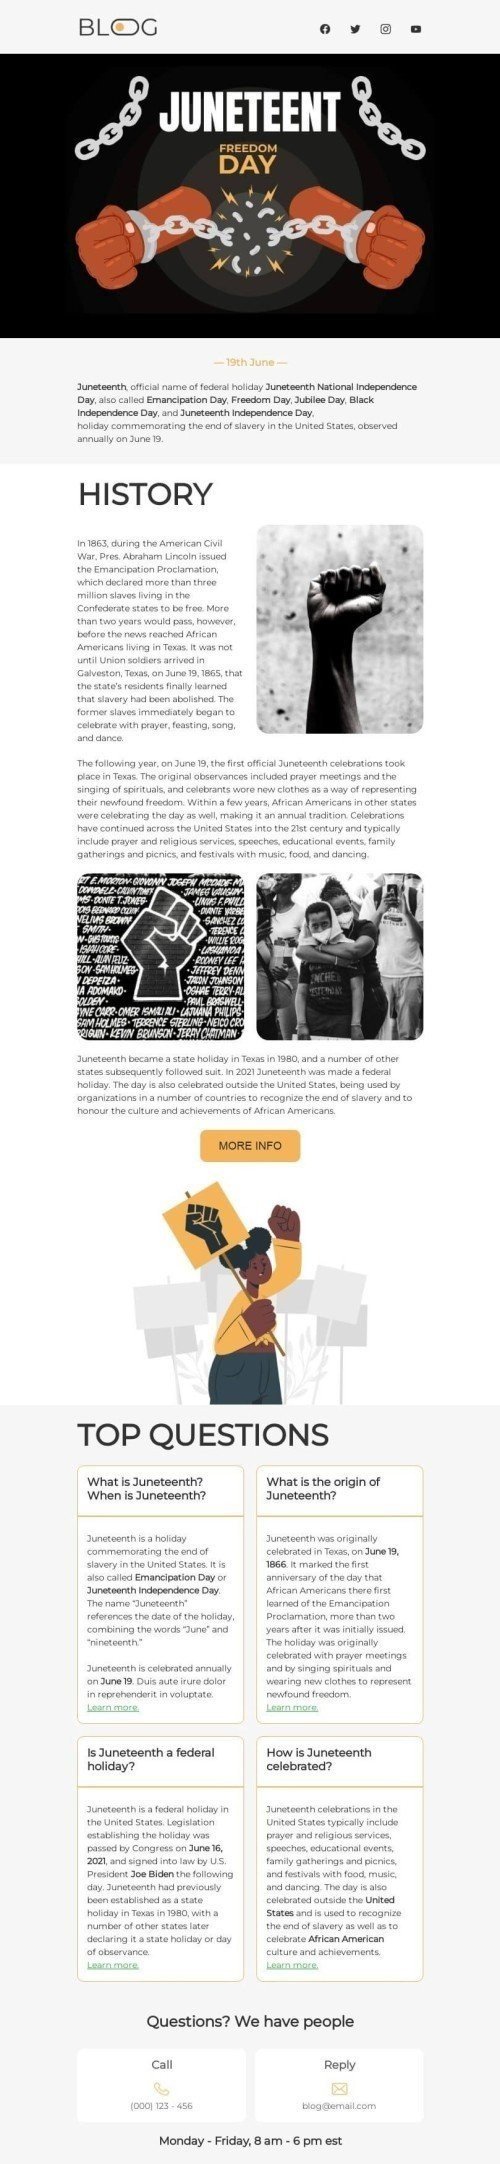 Juneteenth Email Template "History of the holiday" for Publications & Blogging industry desktop view